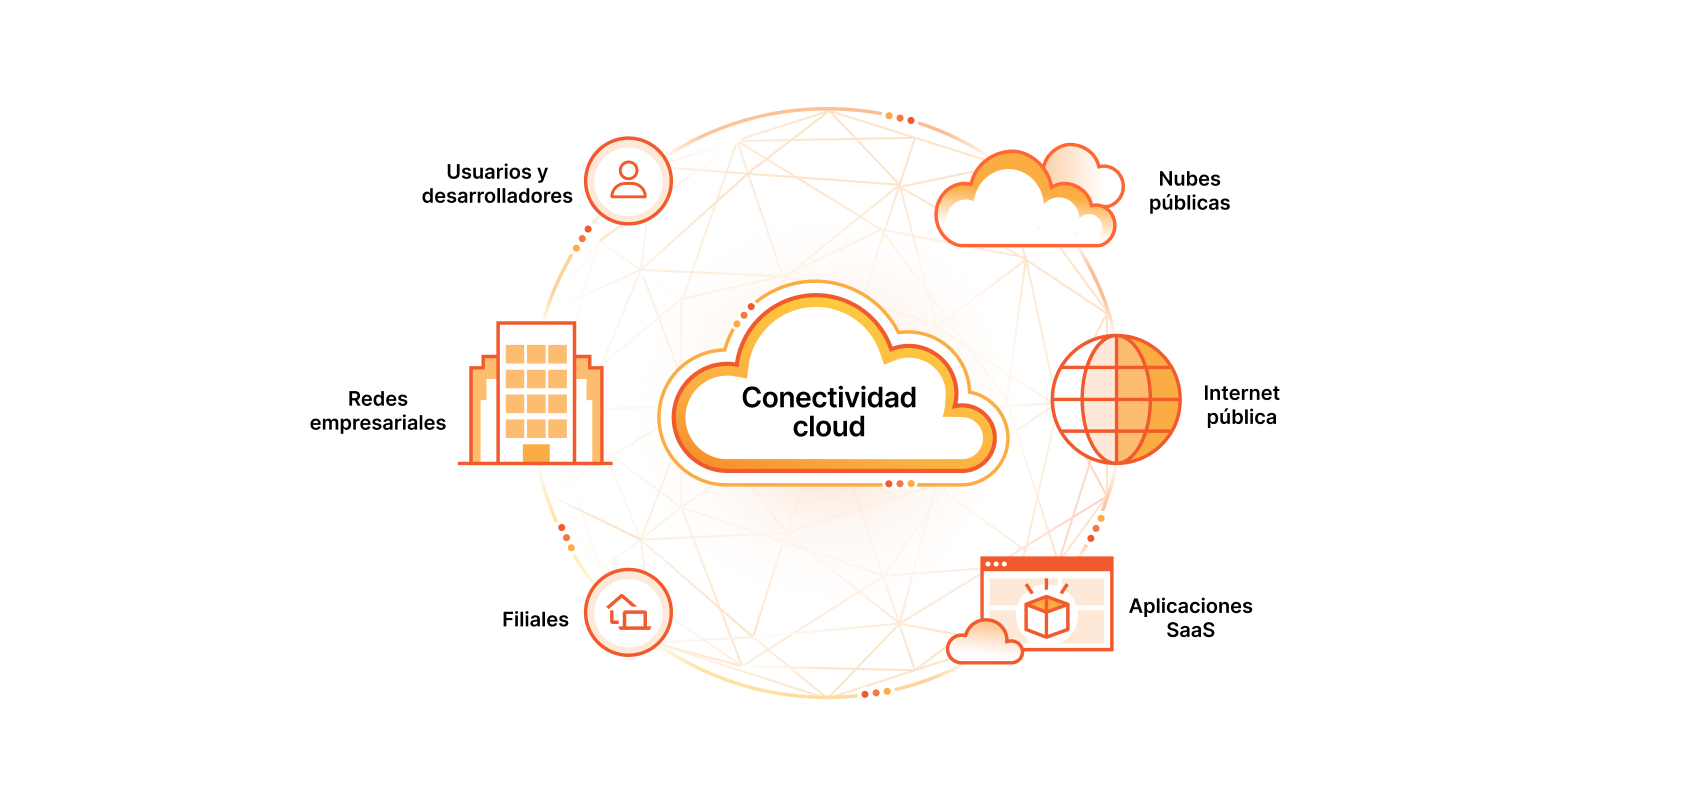 Connectivity cloud diagram. This diagram has a cloud in the middle labeled connectivity cloud. Around the cloud is a circle with icons representing Users, Enterprise Networks, Branch Offices, Public Clouds, Public Internet, and Saas Applications. 